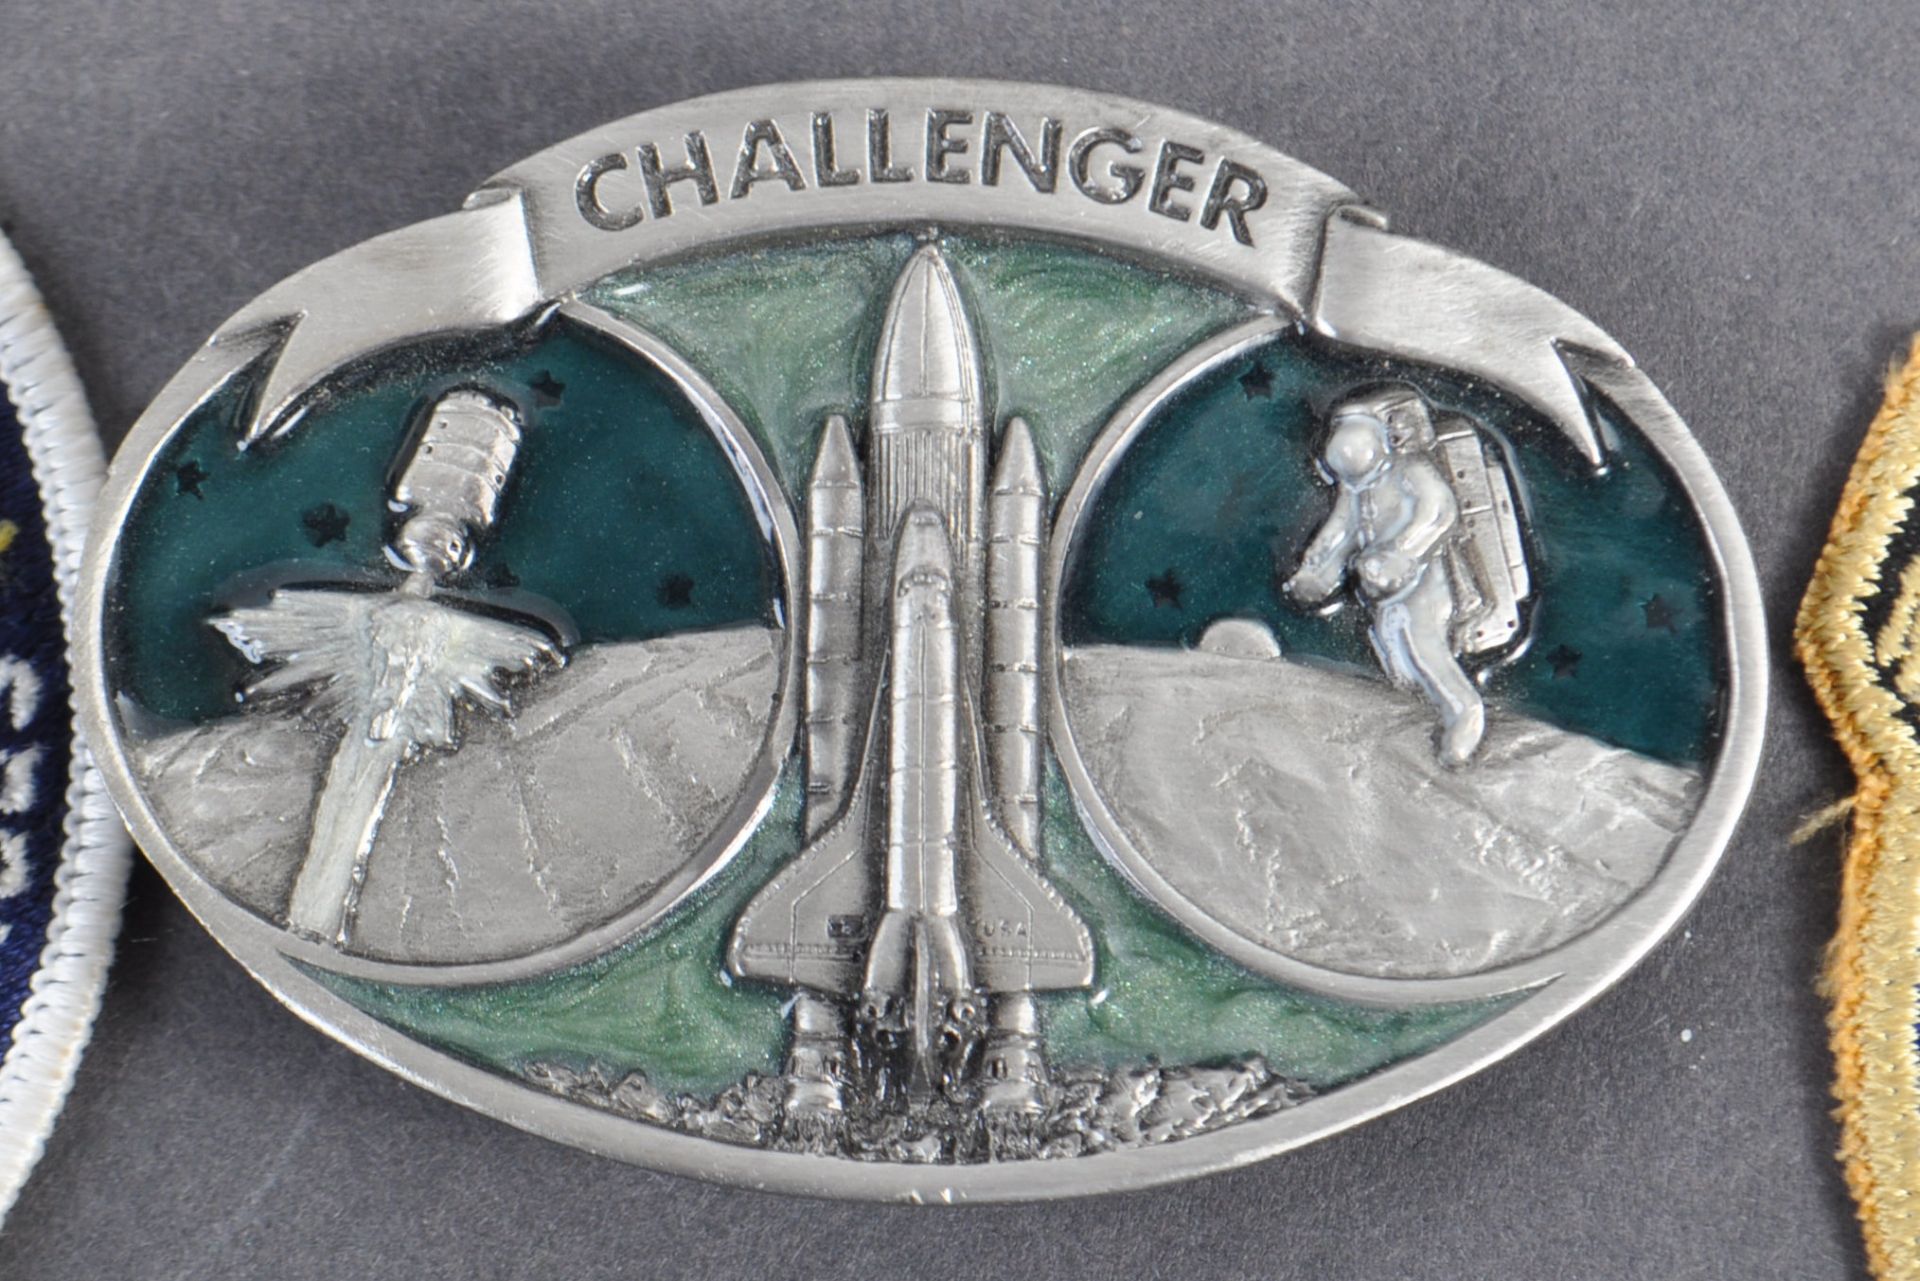 ESTATE OF DAVE PROWSE - SPACE TRAVEL - CHALLENGER BUCKLE & PATCHES - Image 2 of 3